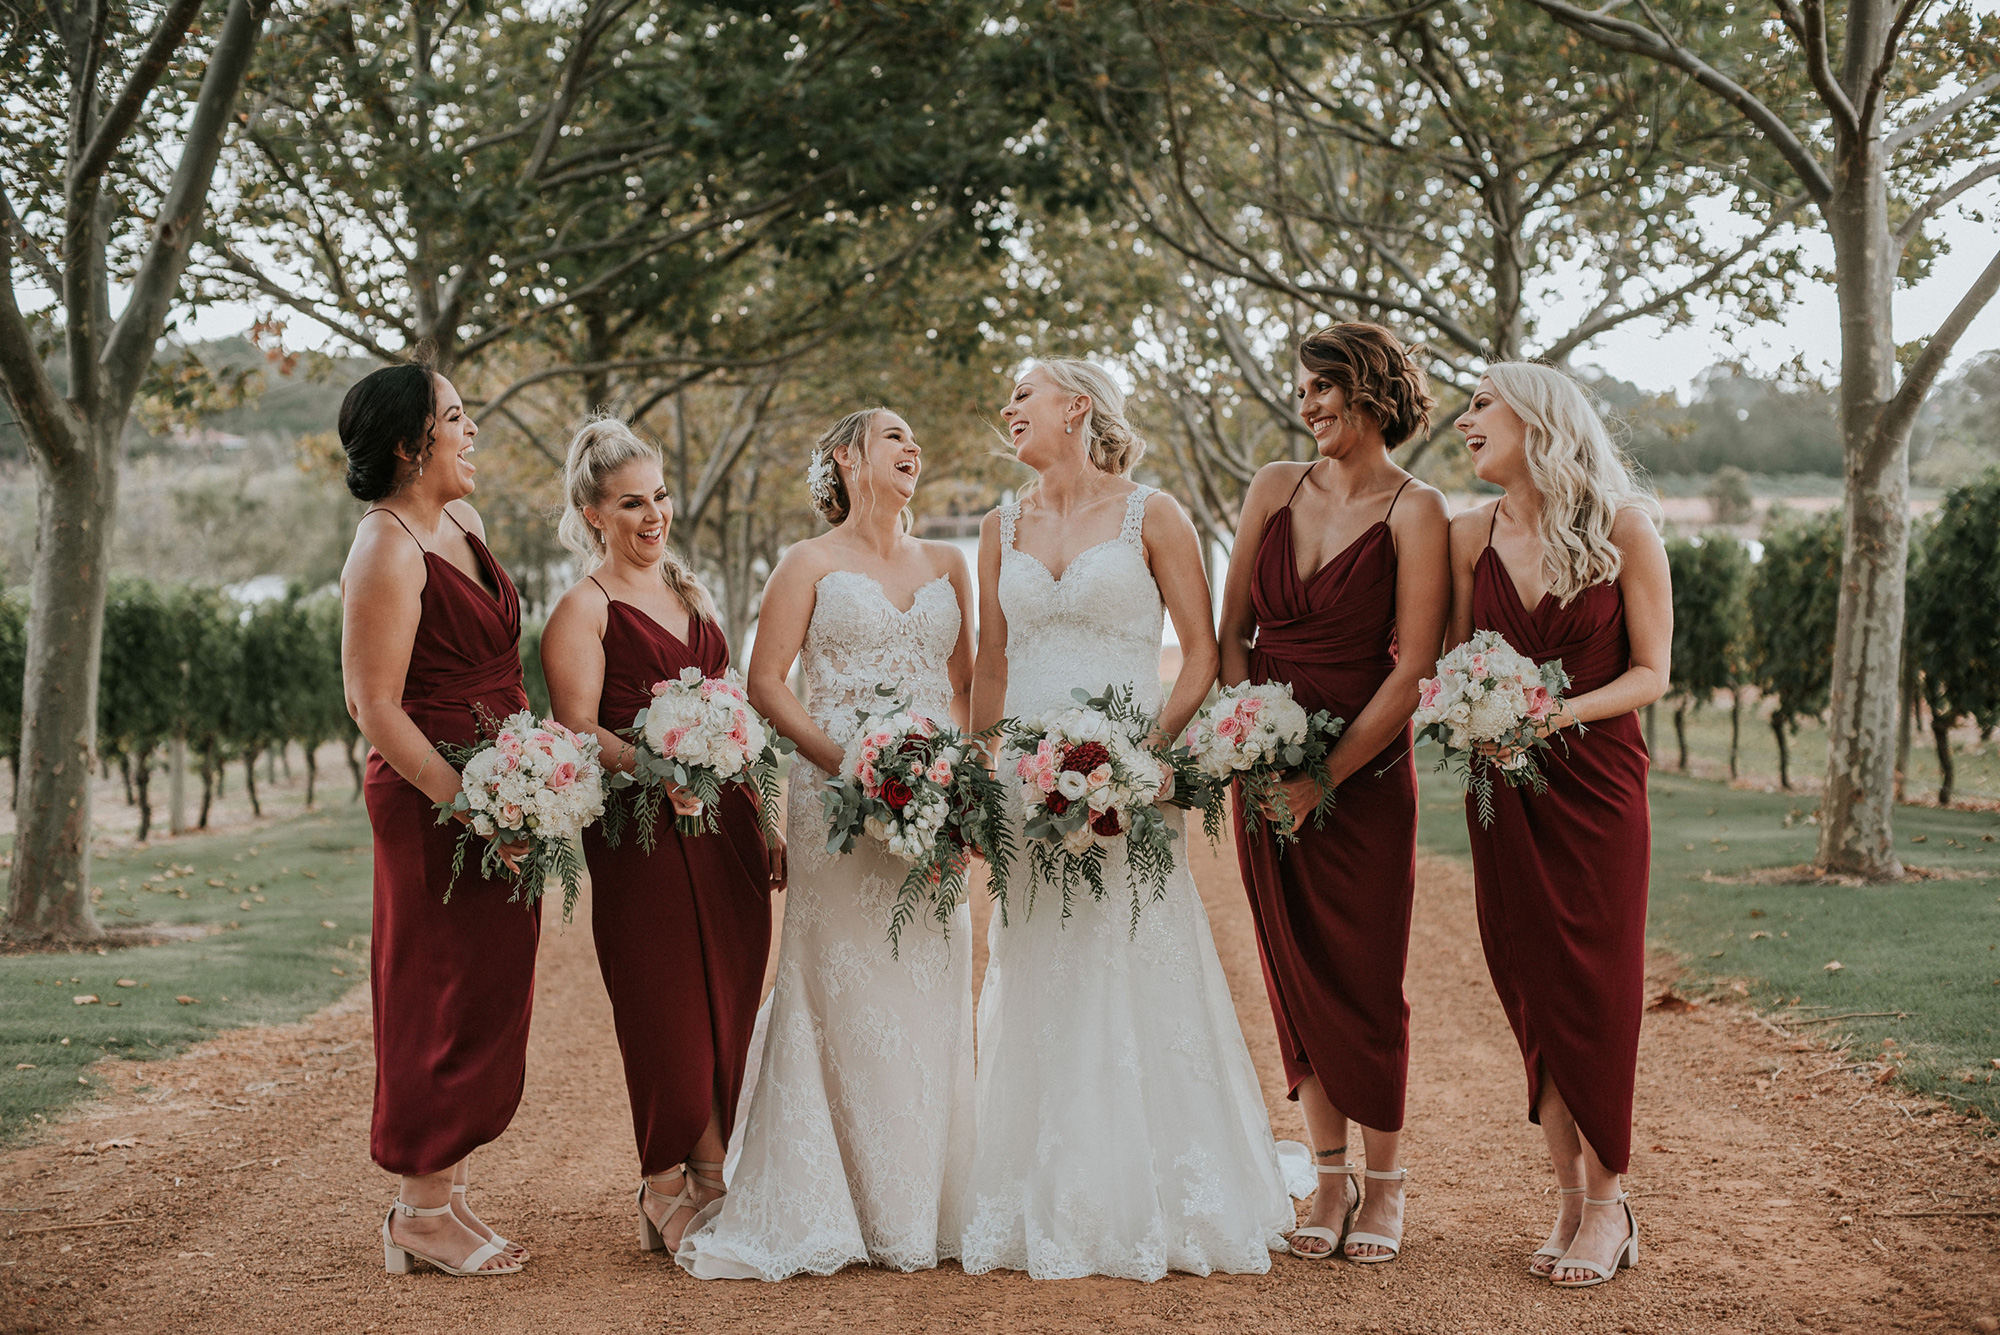 Lisa Vanessa Shannon Stent Images Rustic Relaxed Wedding 031